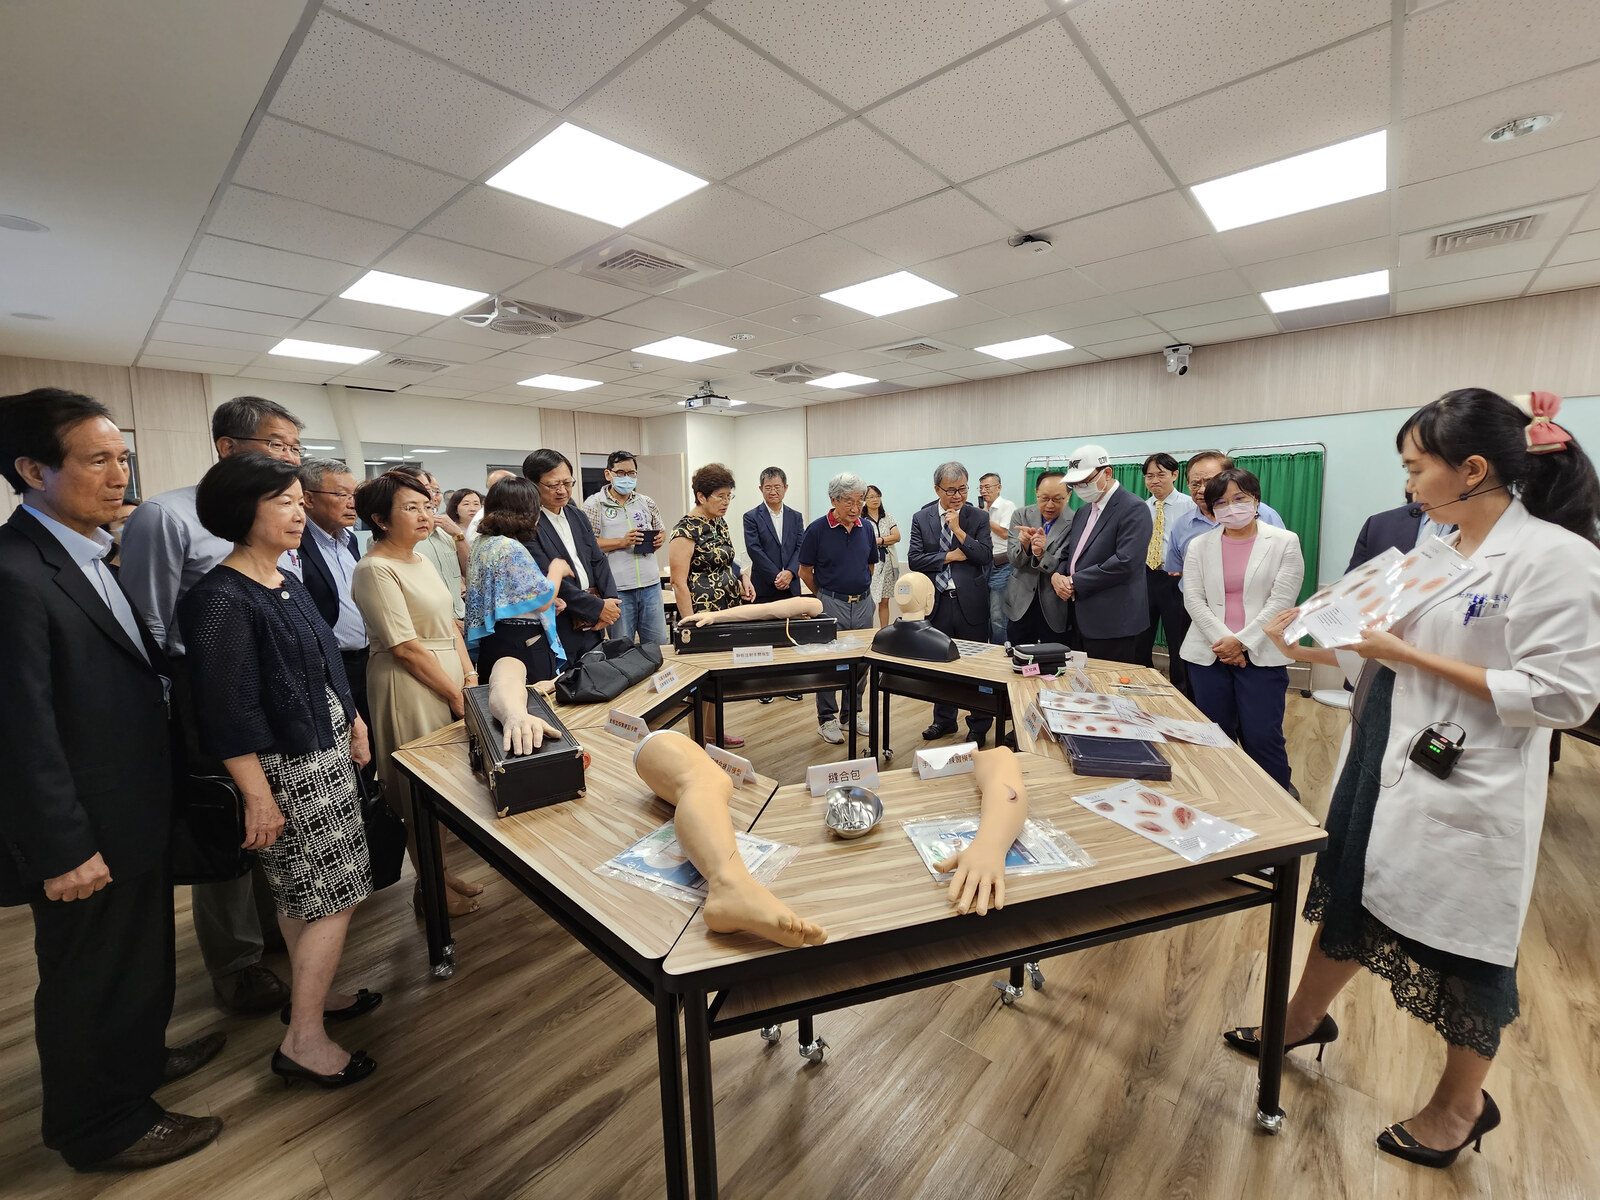 The NSYSU College of Medicine showcased the functionality of clinical skills training teaching props and manikins during the event.